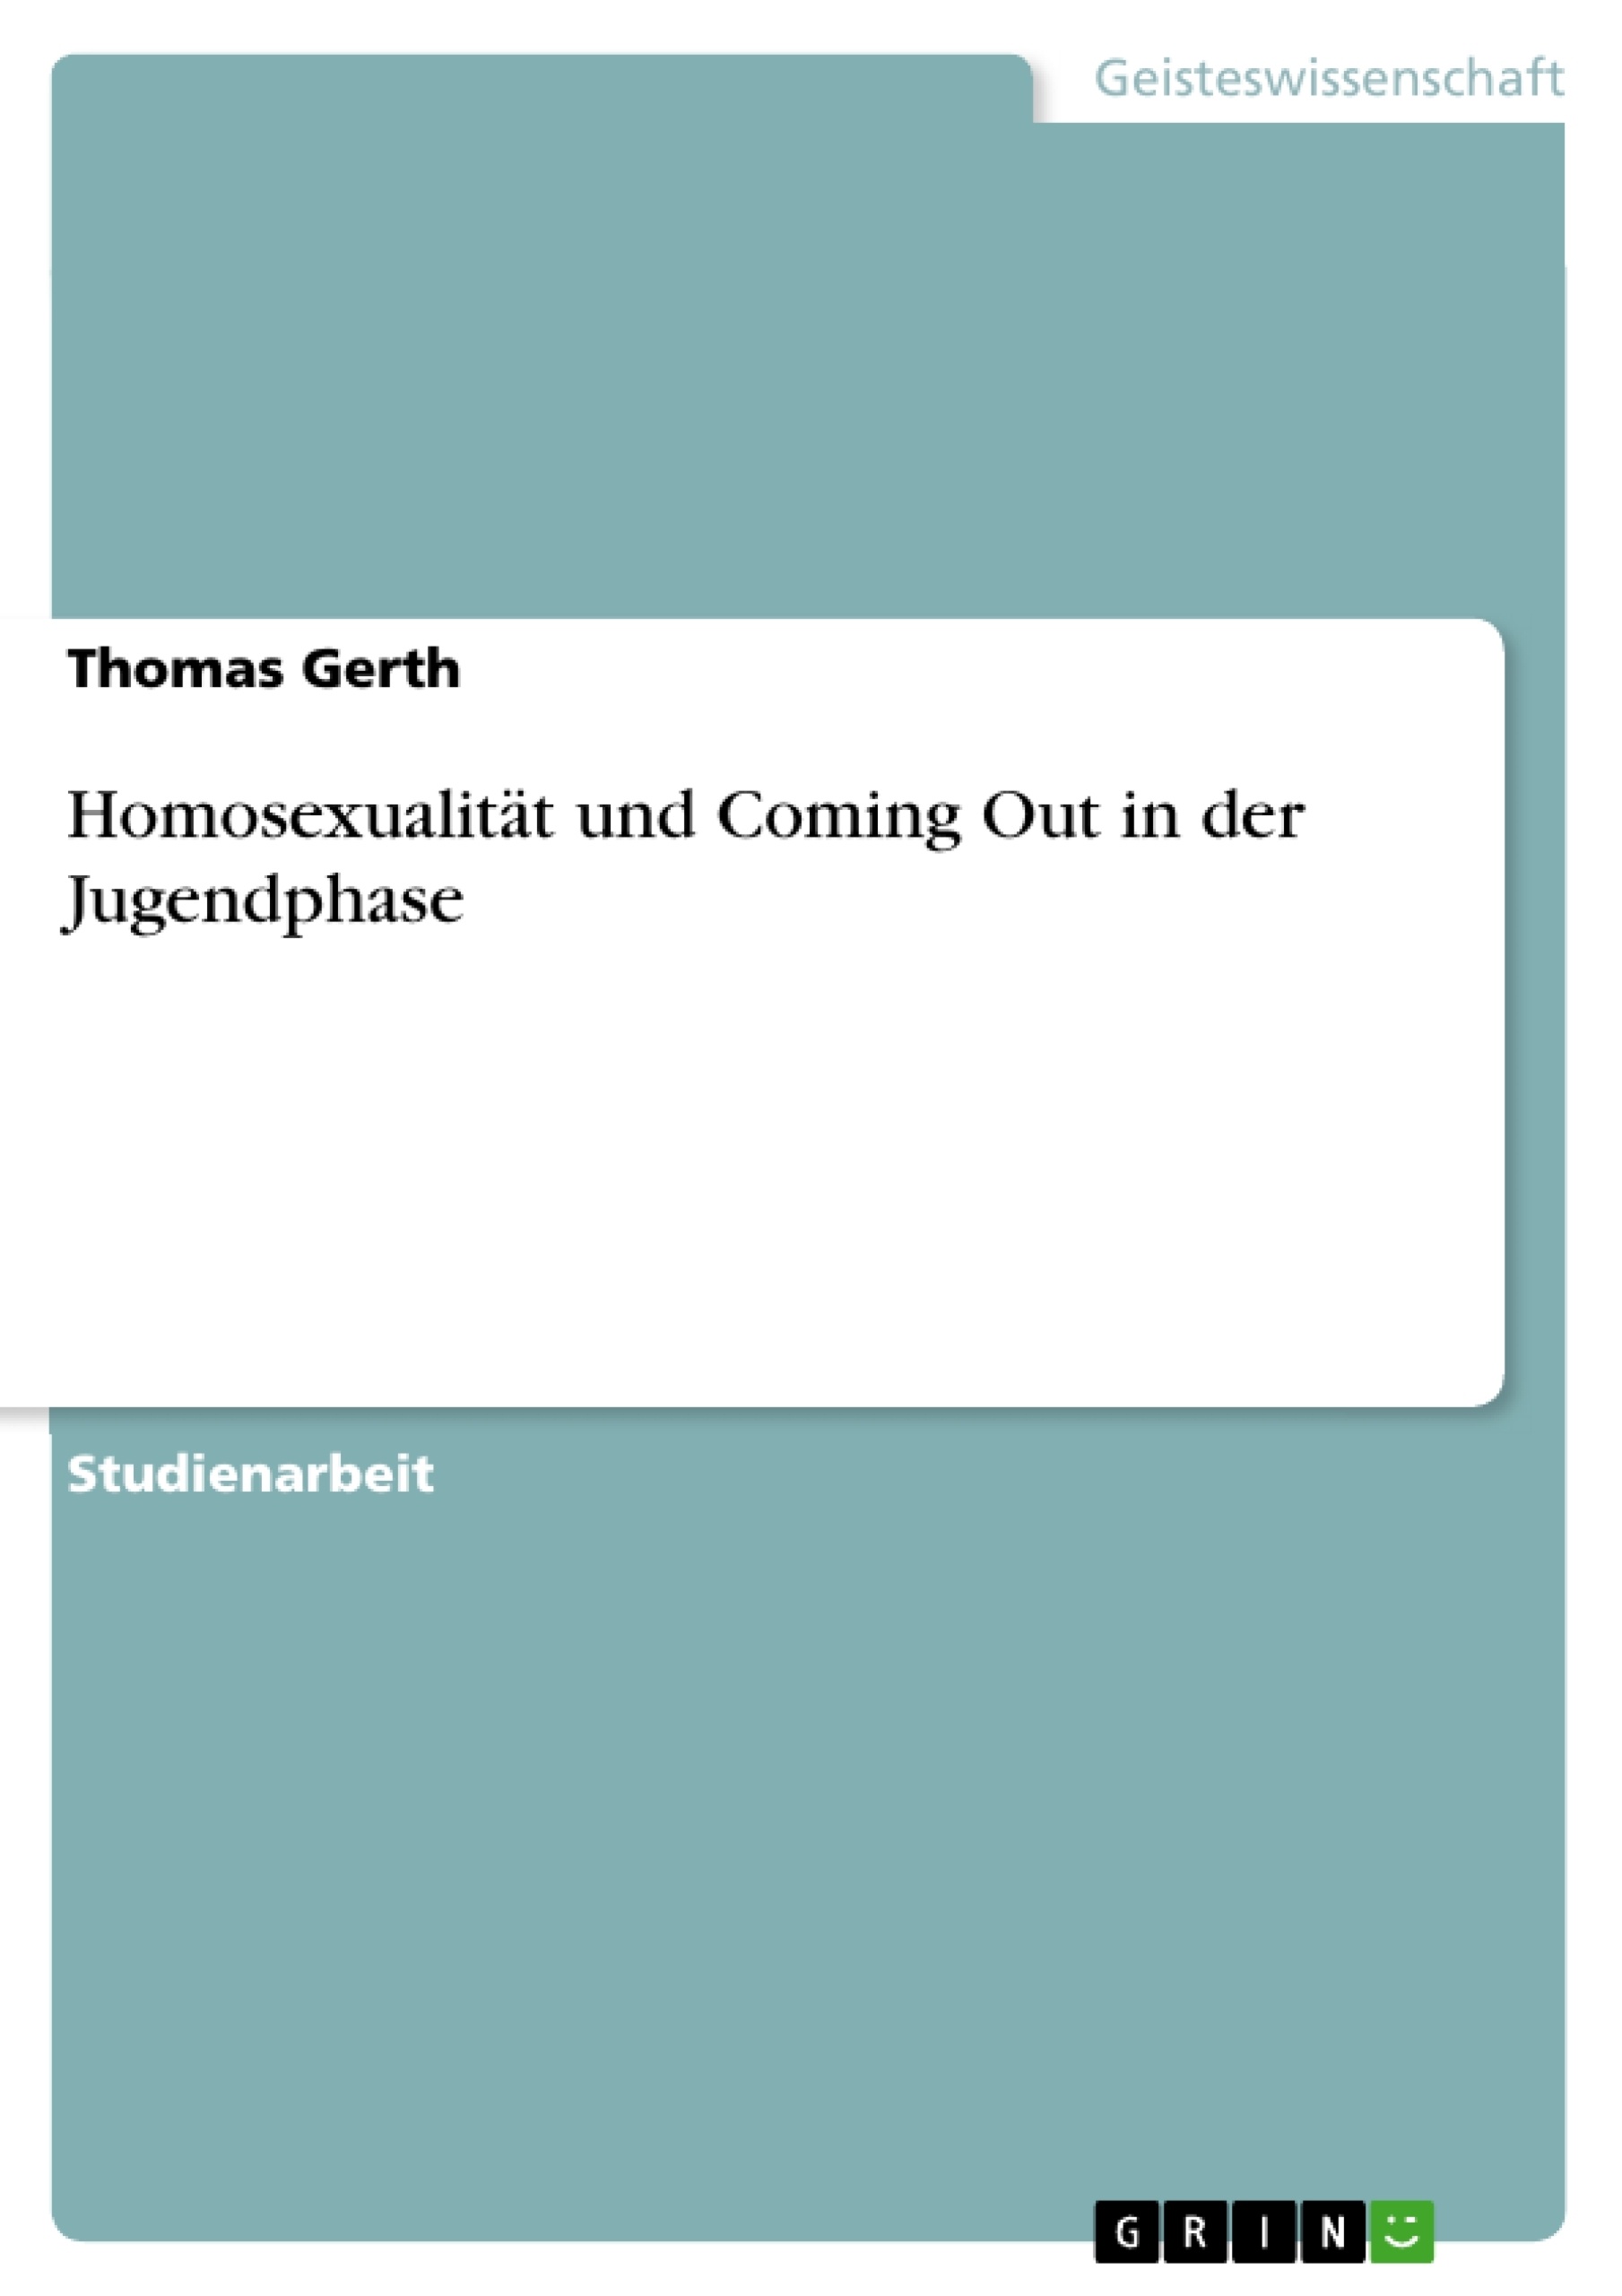 Título: Homosexualität und Coming Out in der Jugendphase